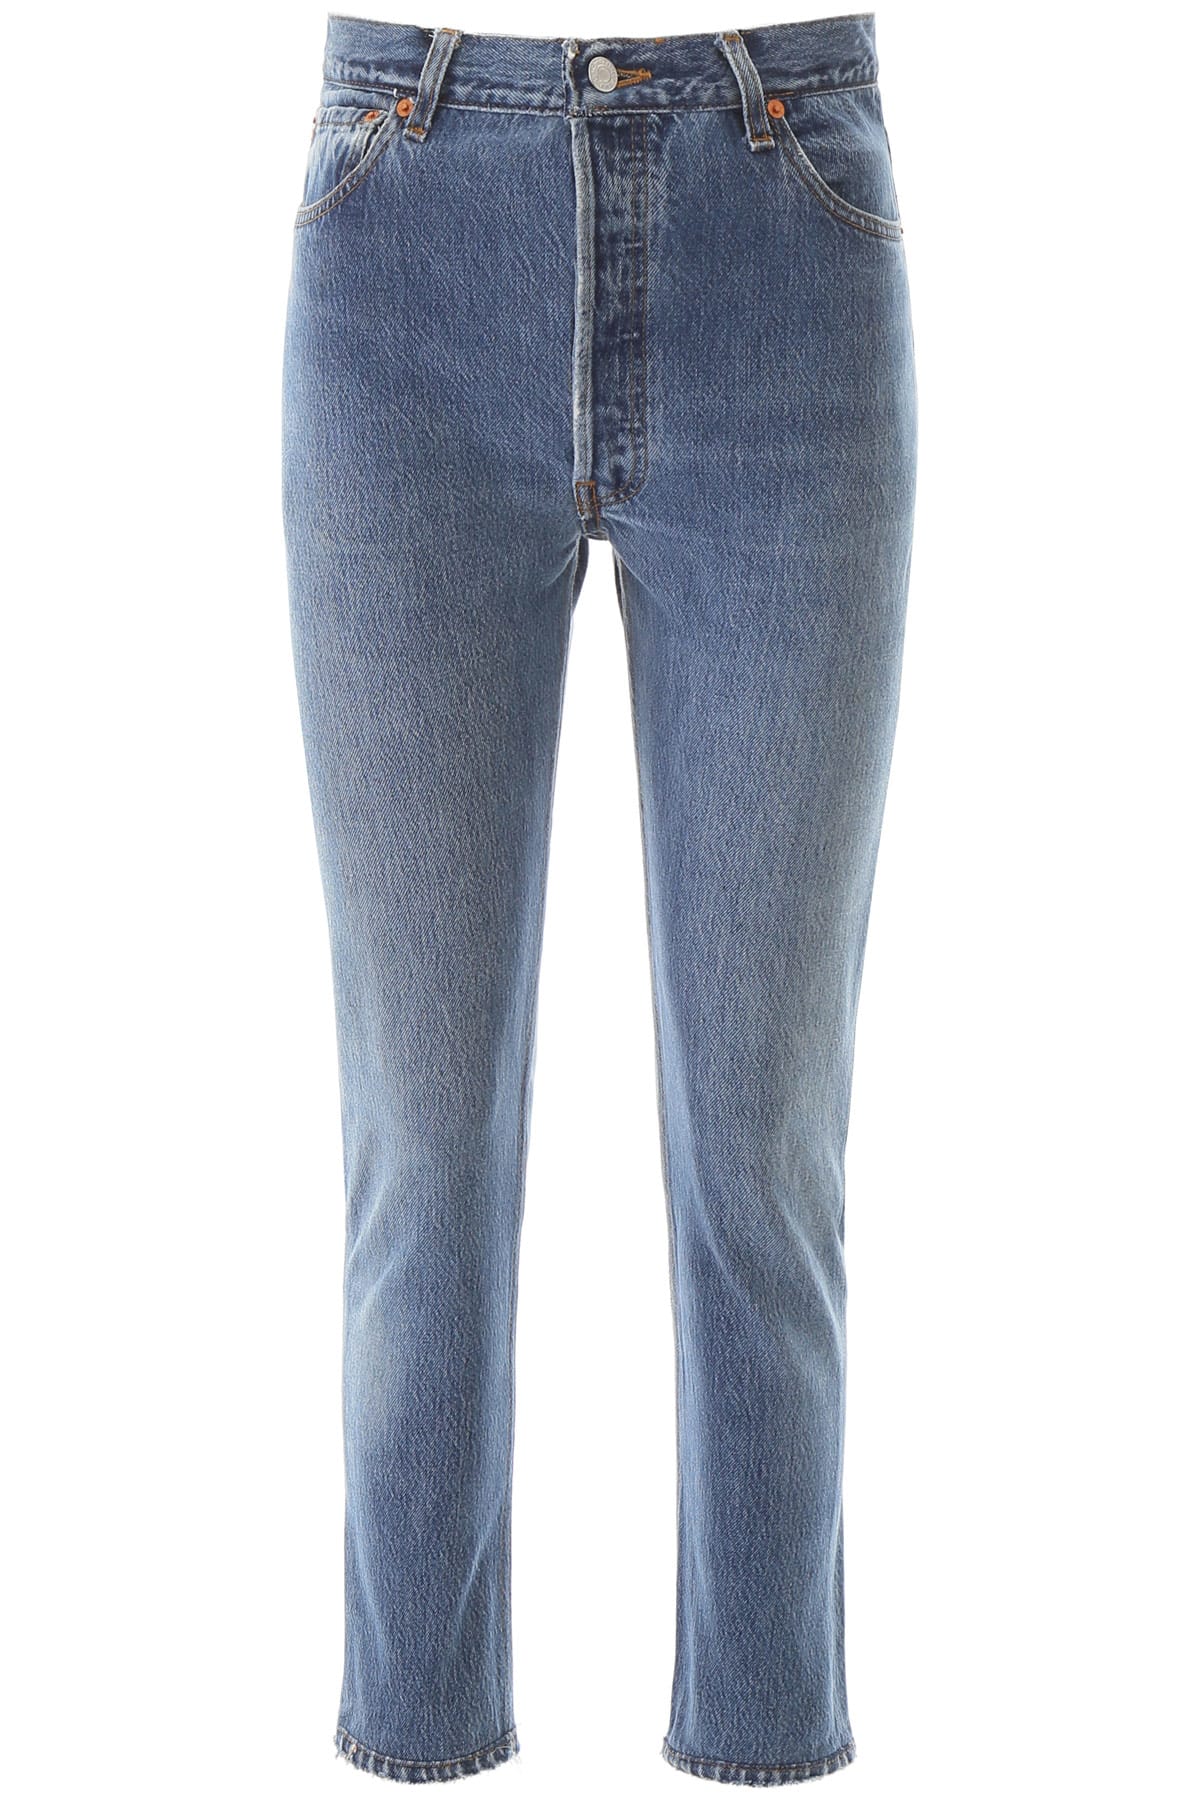 RE/DONE HIGH RISE SANKLE CROP JEANS,1003HRAC INDIG